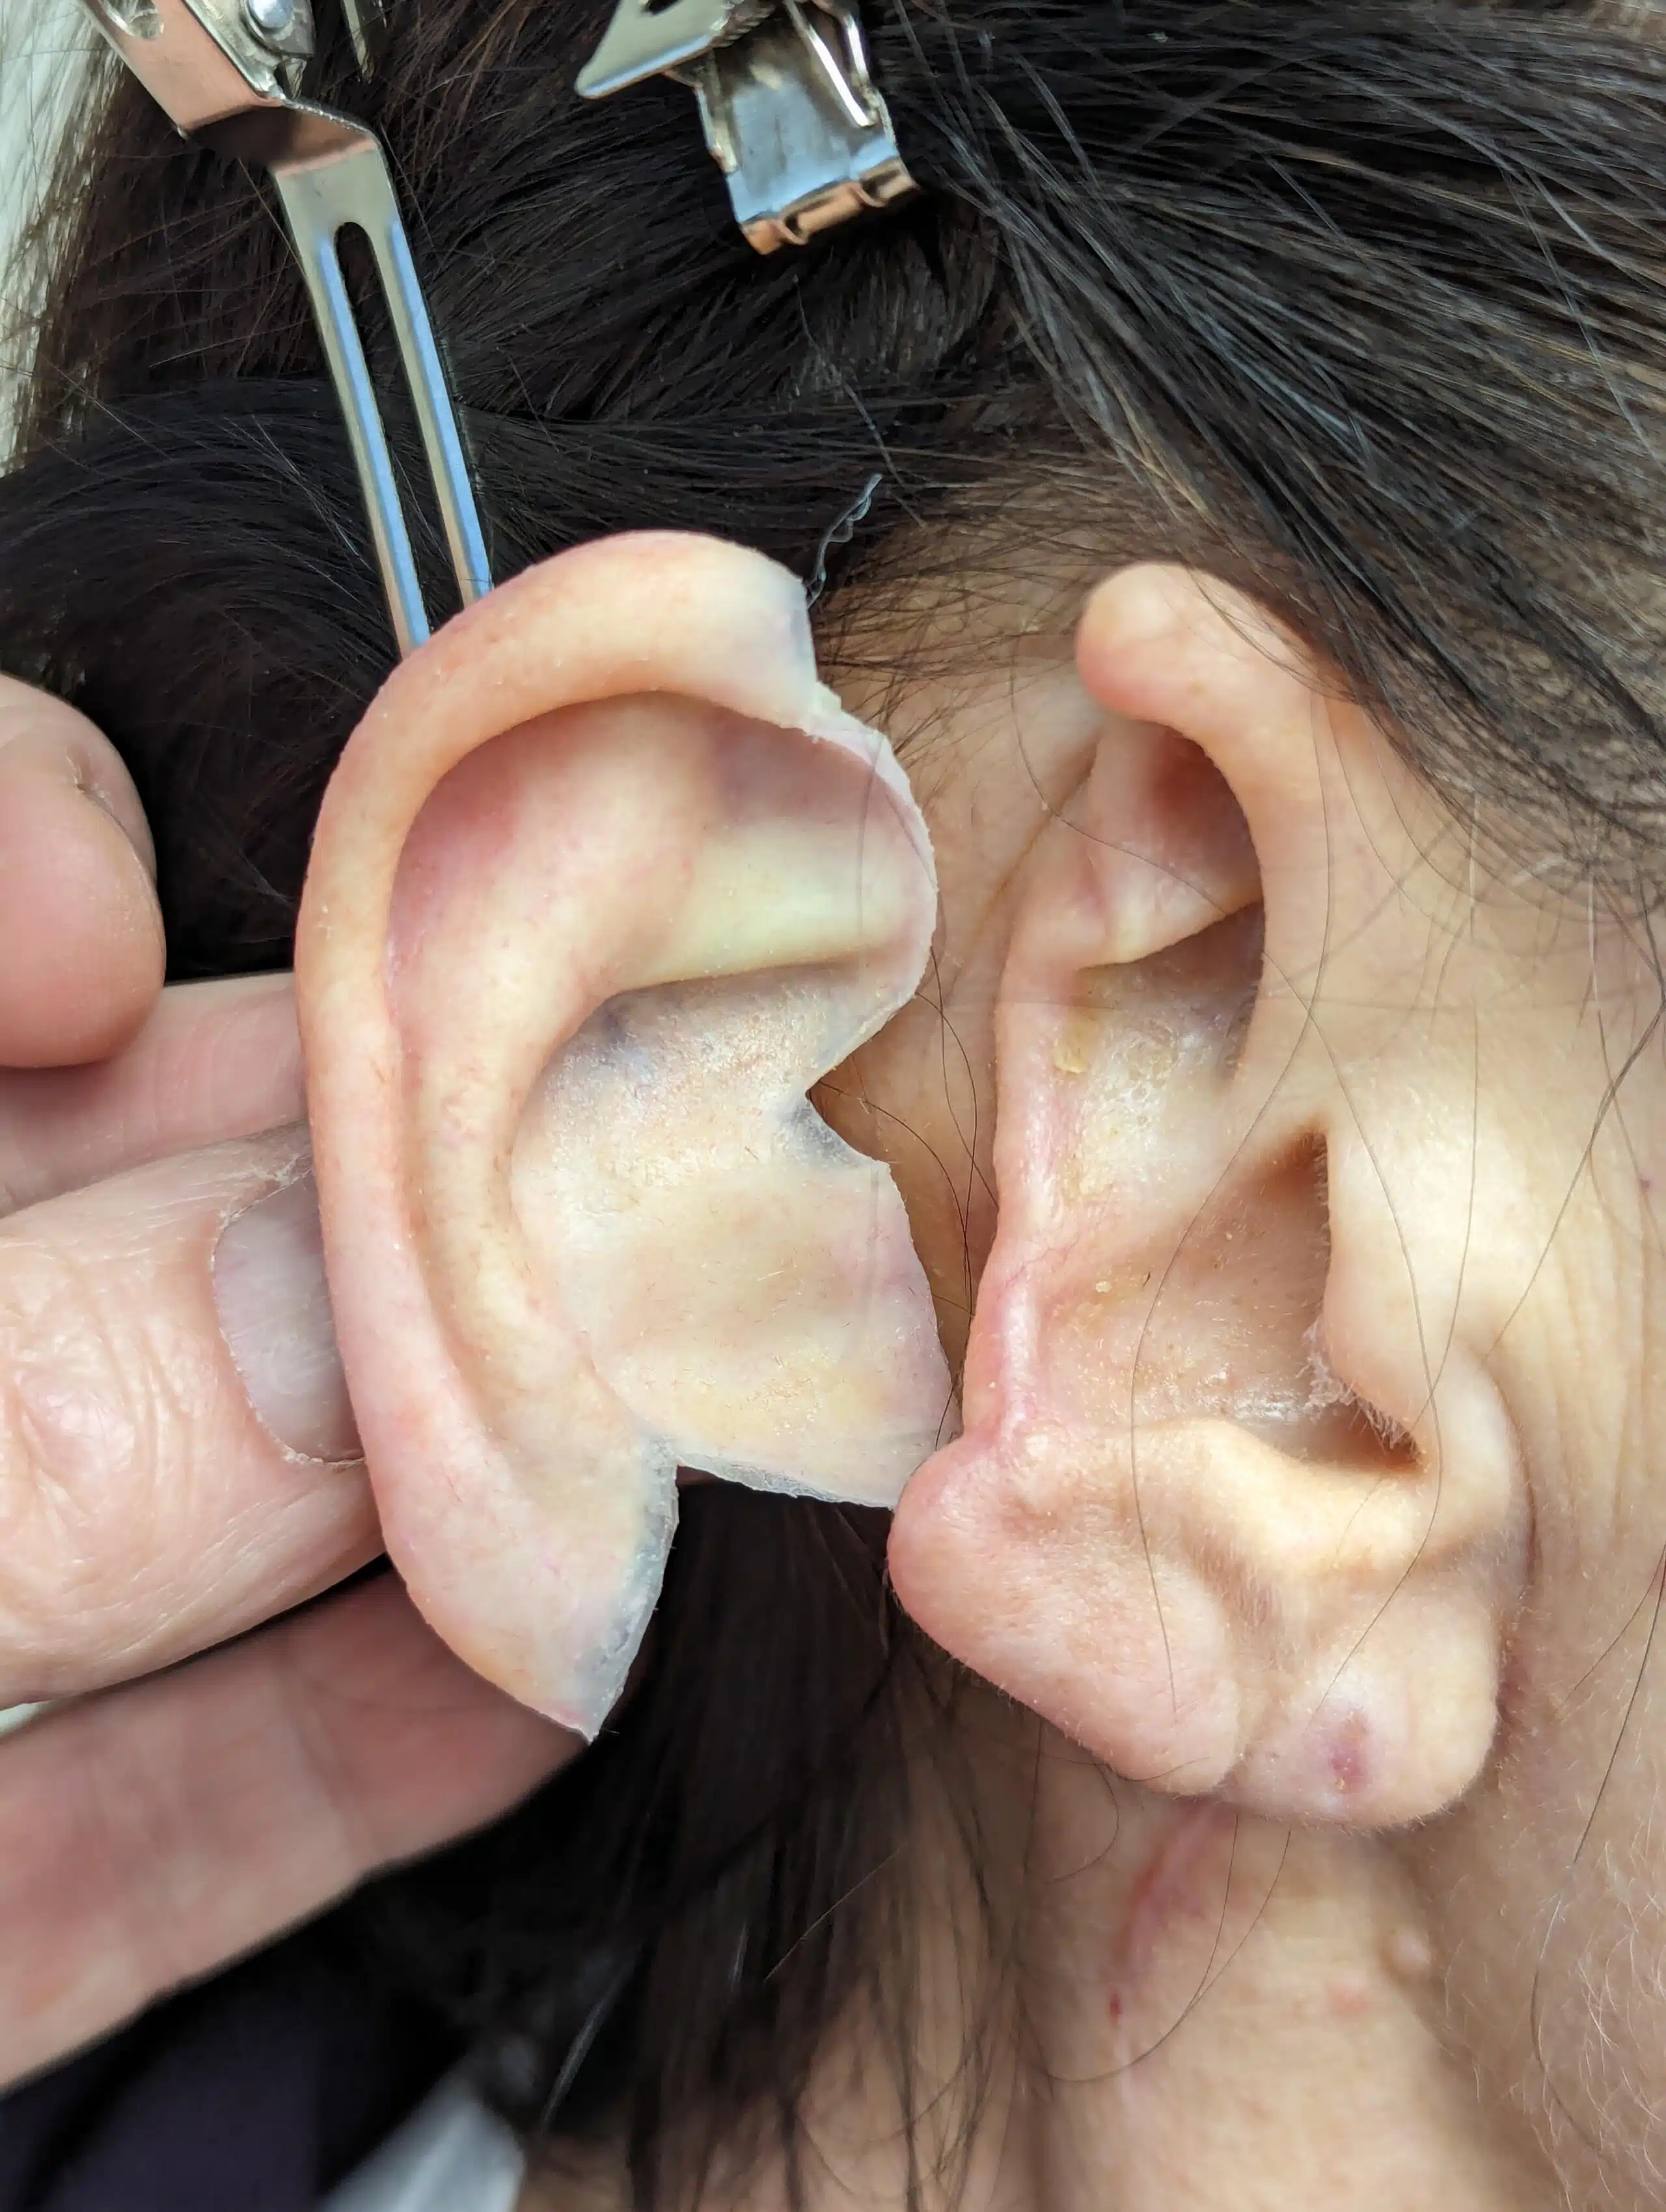 A person is holding the ear of another person